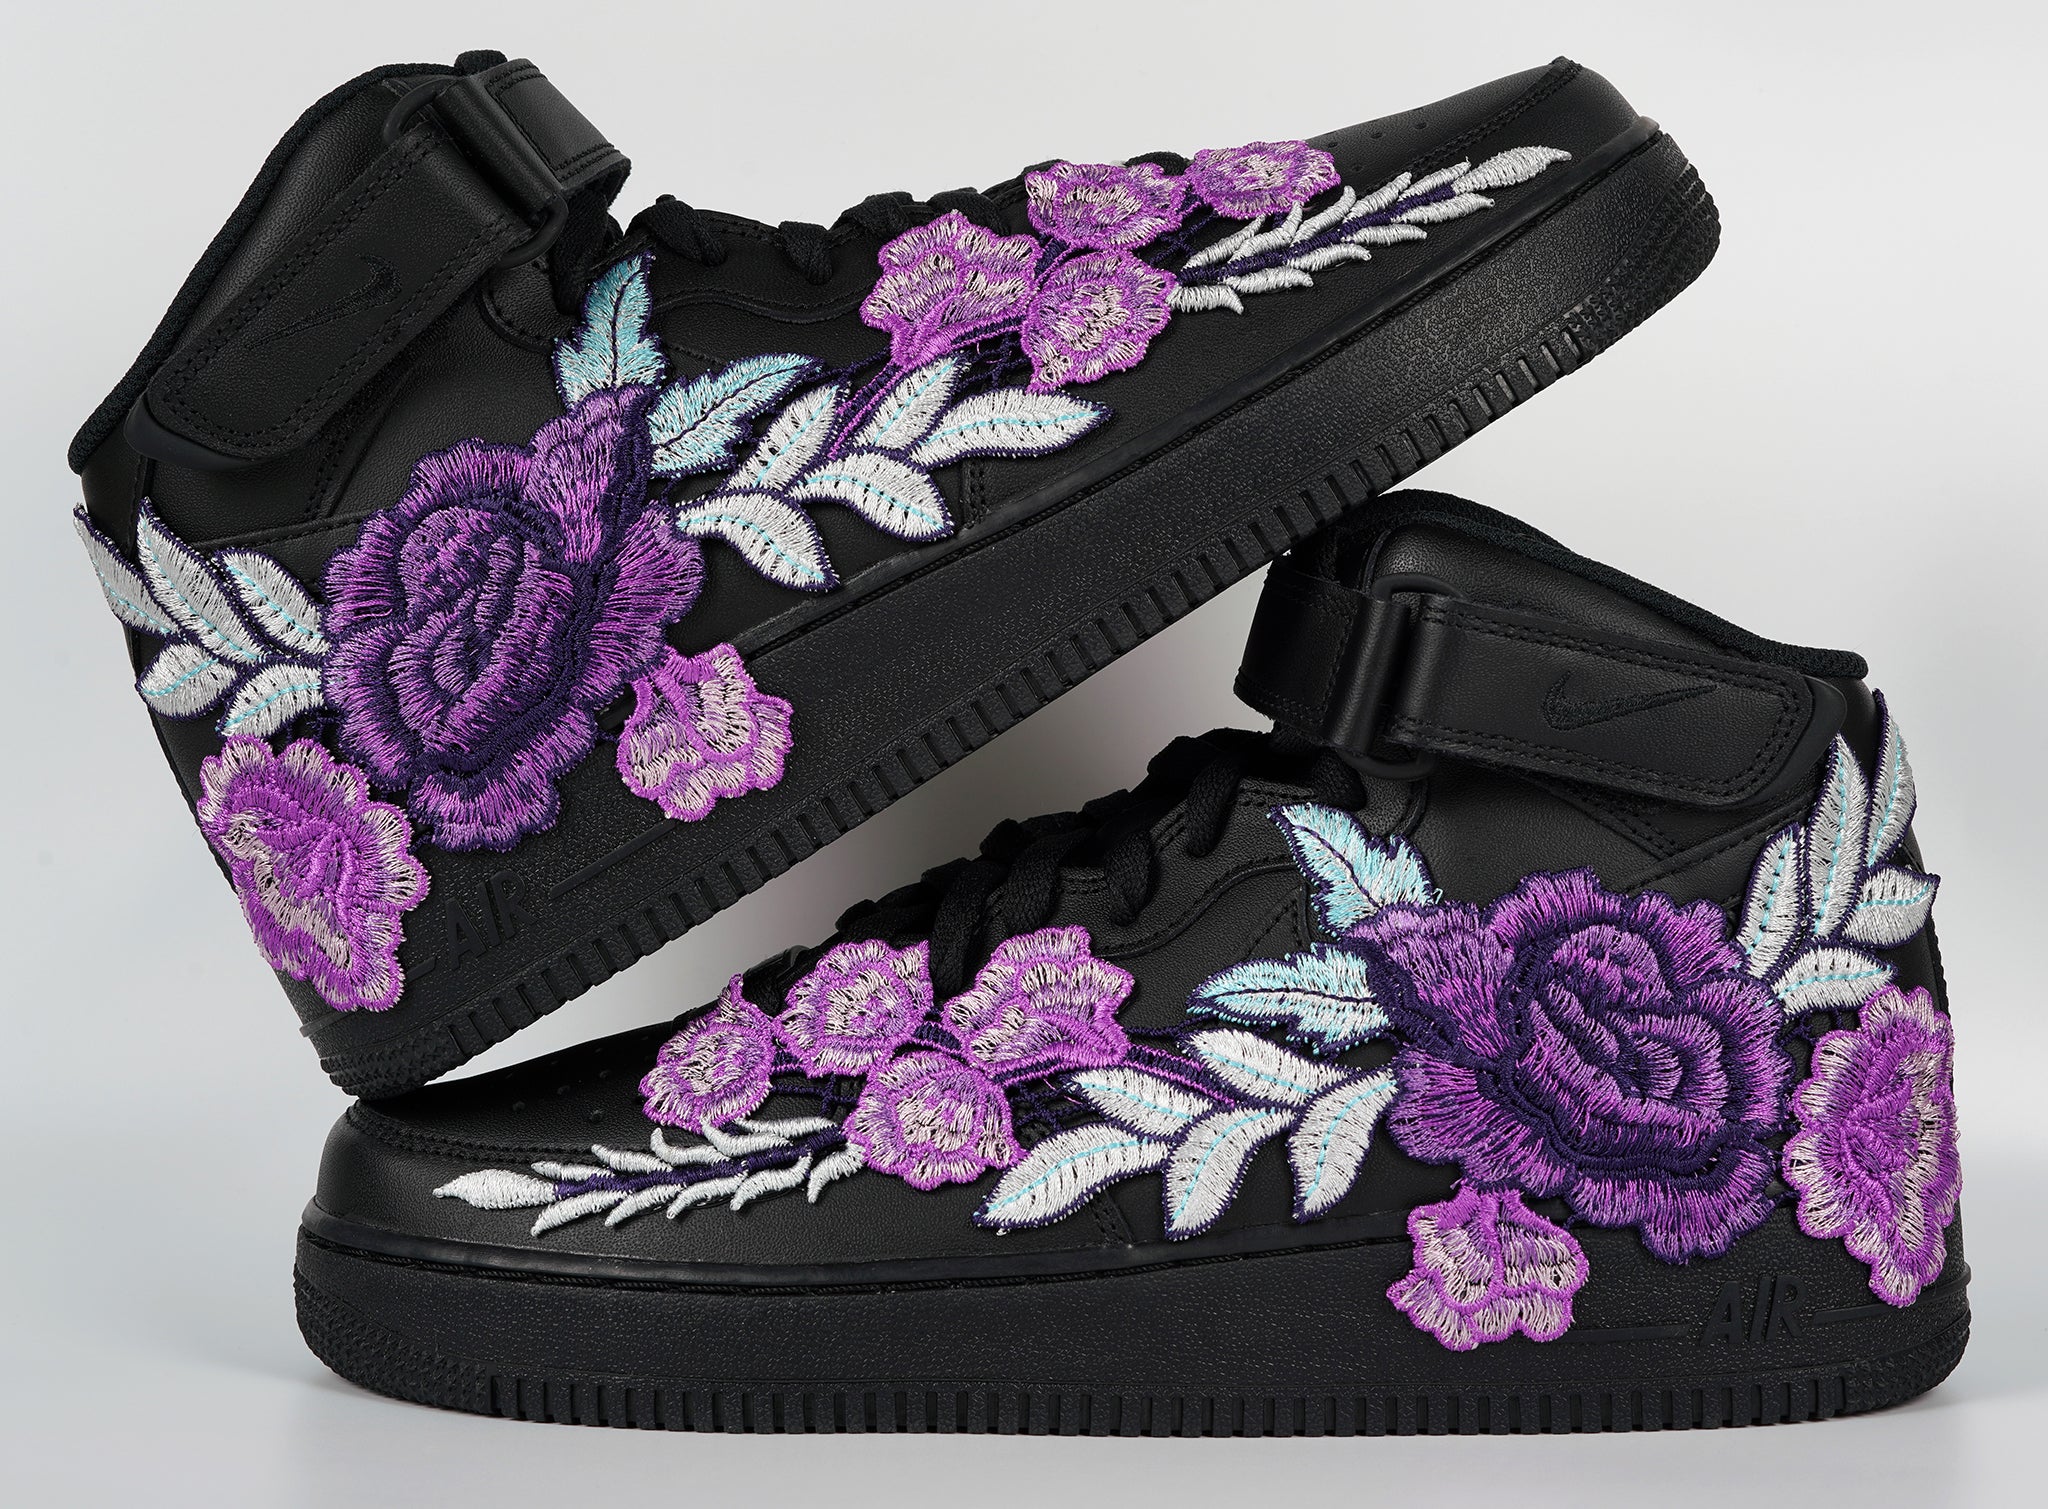 Nike Air Force 1 Custom Mid Purple Rose Shoes Flower Floral Black All Sizes Men Women & Kids Stacked